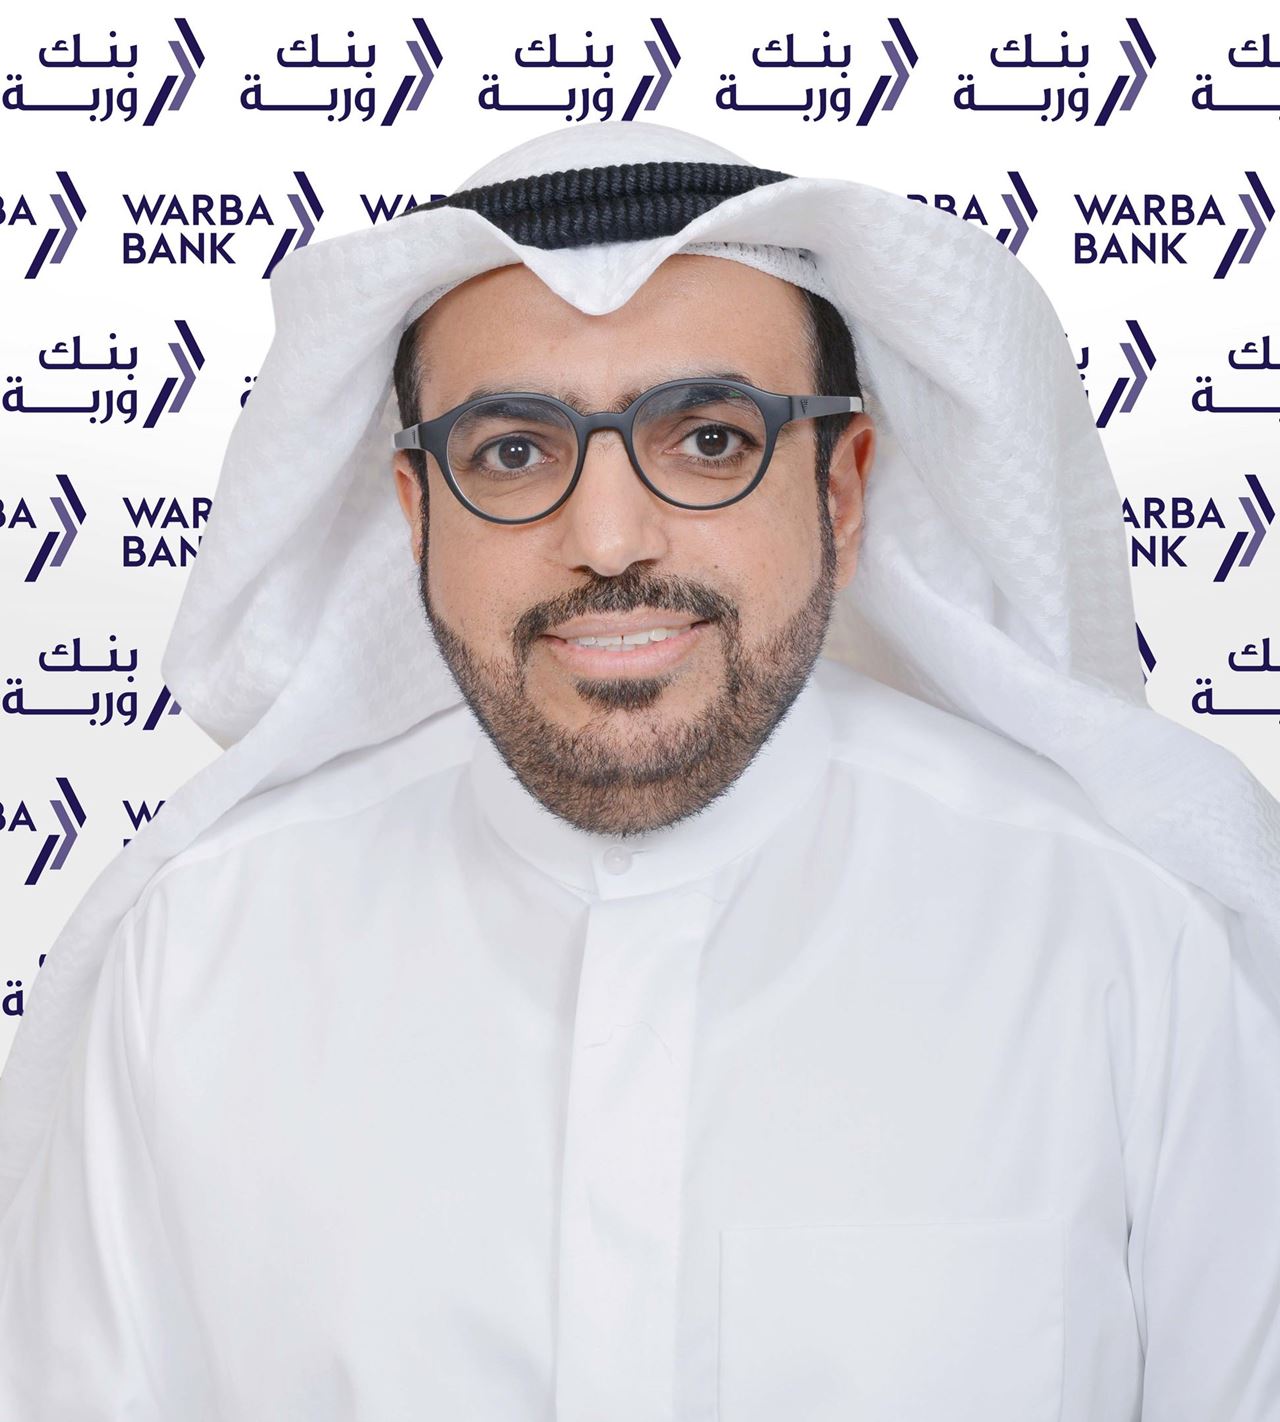 Mr. Shaheen Hamad Alghanem, Warba Bank’s Chief Executive Officer